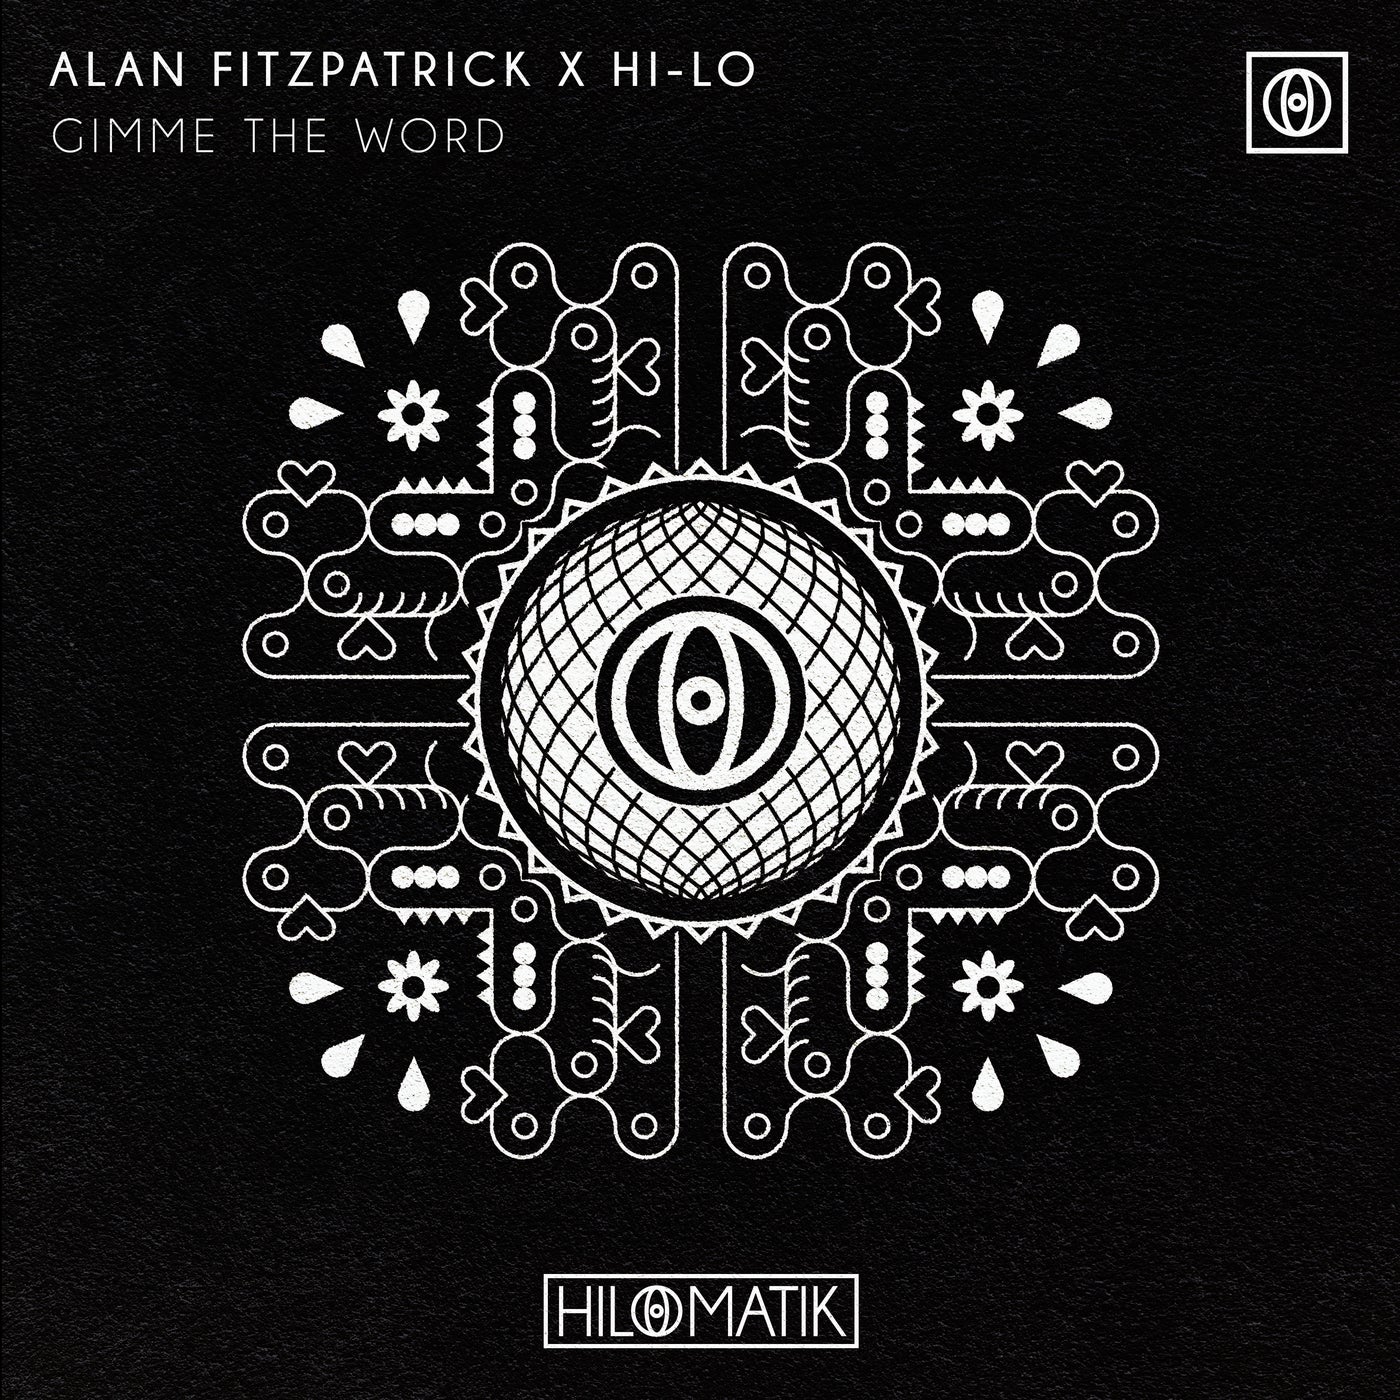 image cover: HI-LO, Alan Fitzpatrick - Gimme The Word (Extended Mix) on HILOMATIK